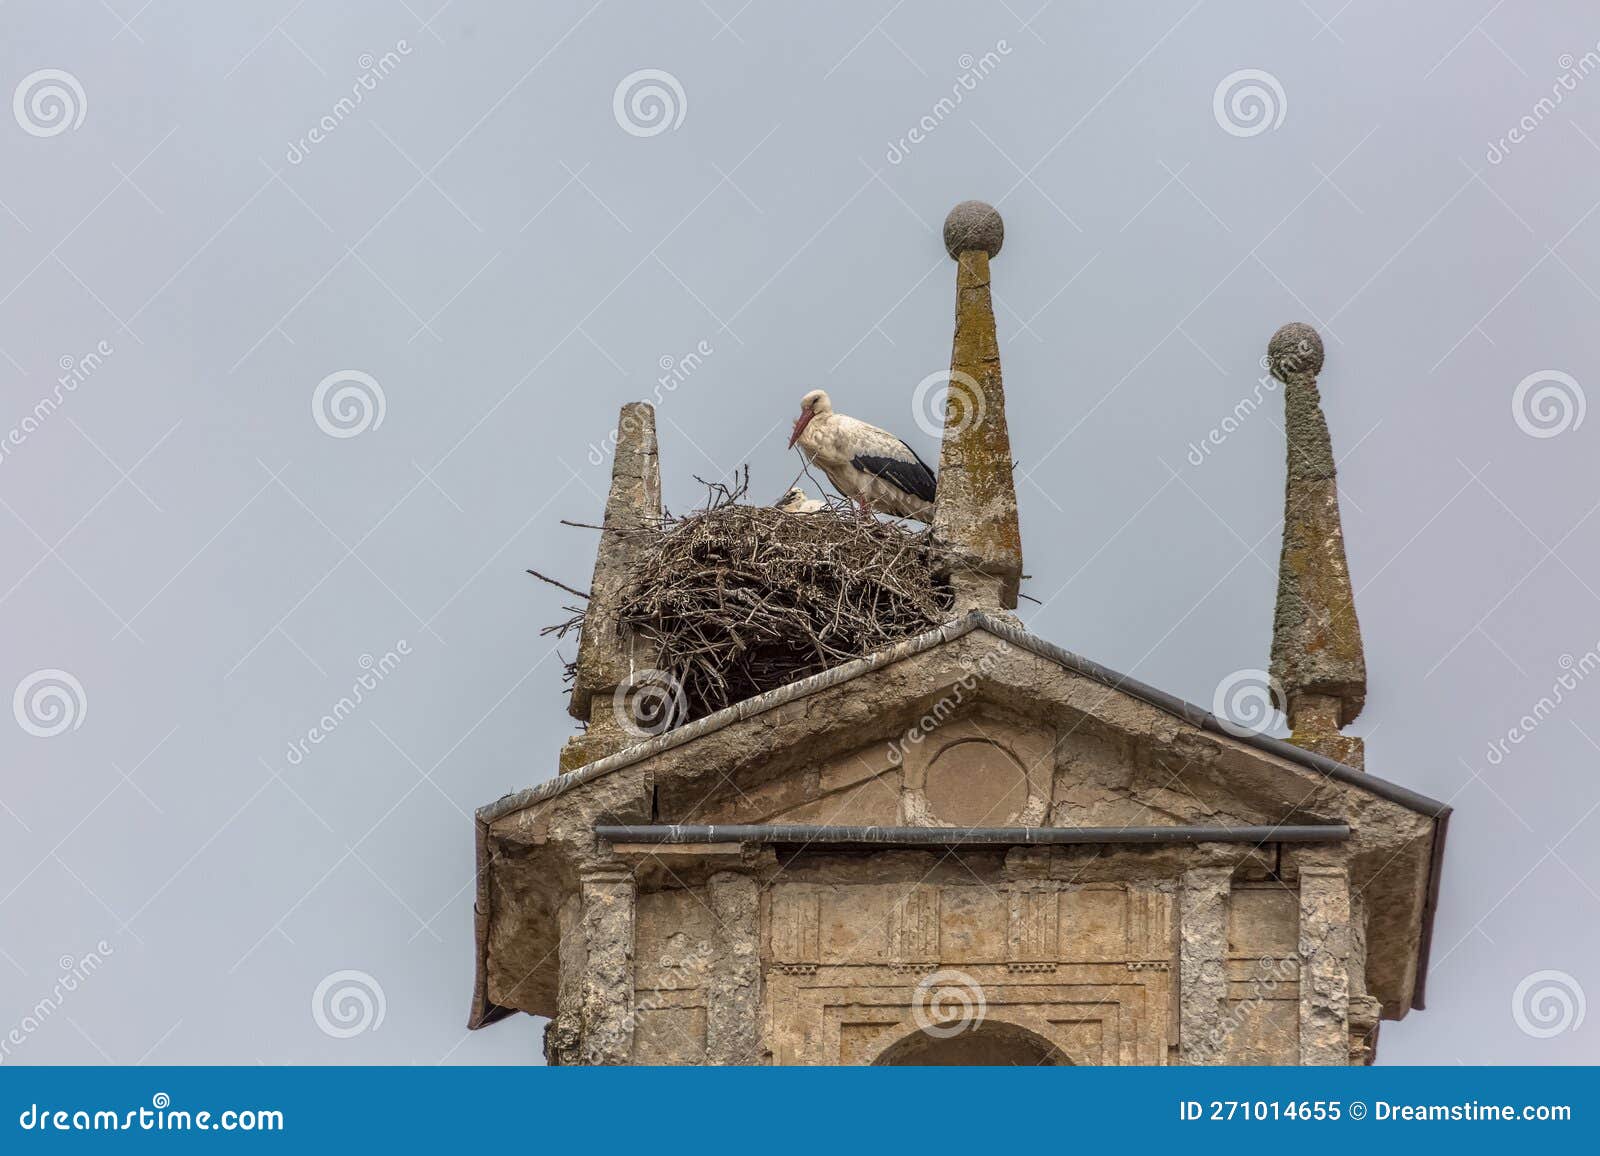 female iberian stork guarding her young in a huge nest built above a classic building tower, located in cuidad rodrigo, spain